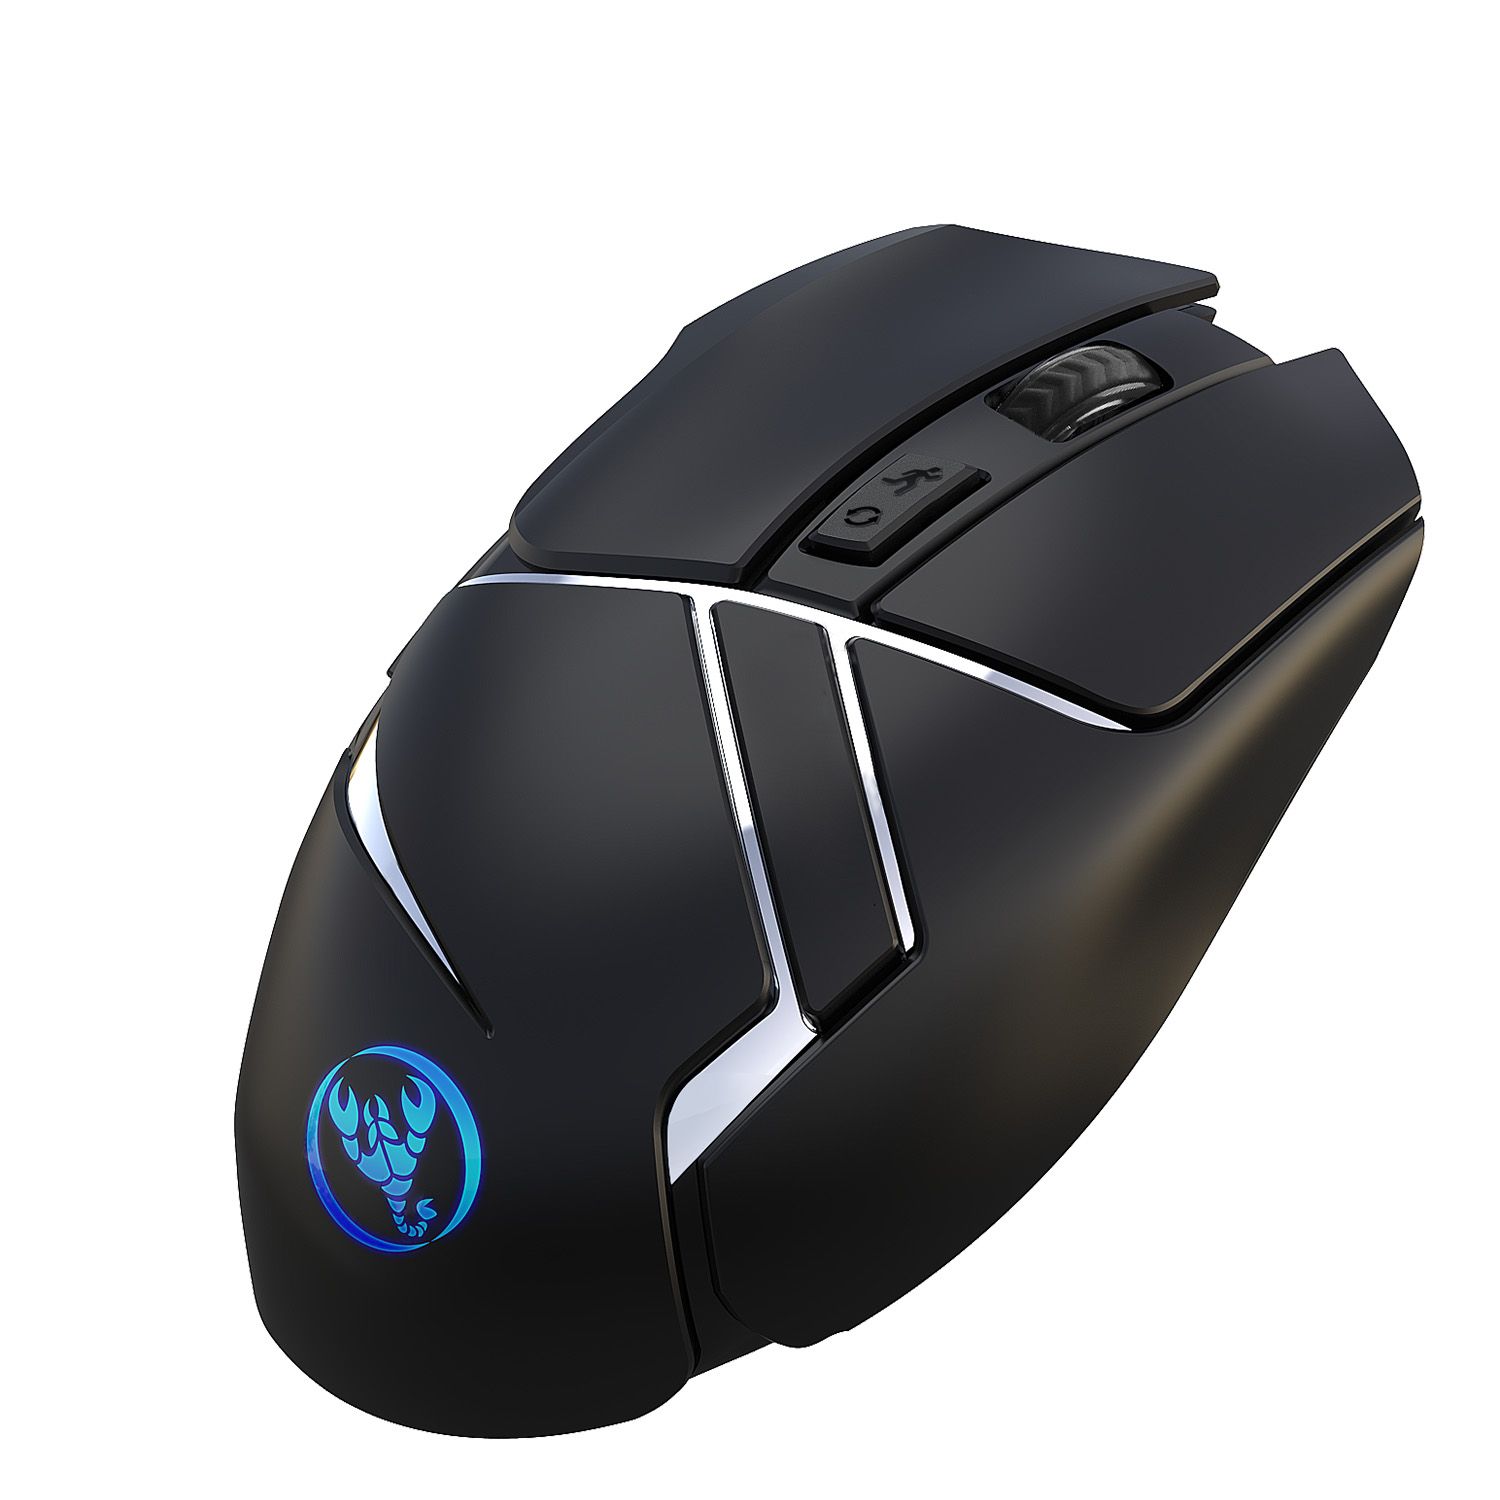 HXSJ-T60-Wireless-Gaming-Mouse-24G-Rechargable-2400Dpi-6Keys-RGB-Lumious-Gaming-Mouse-For-Laptop-Des-1765859